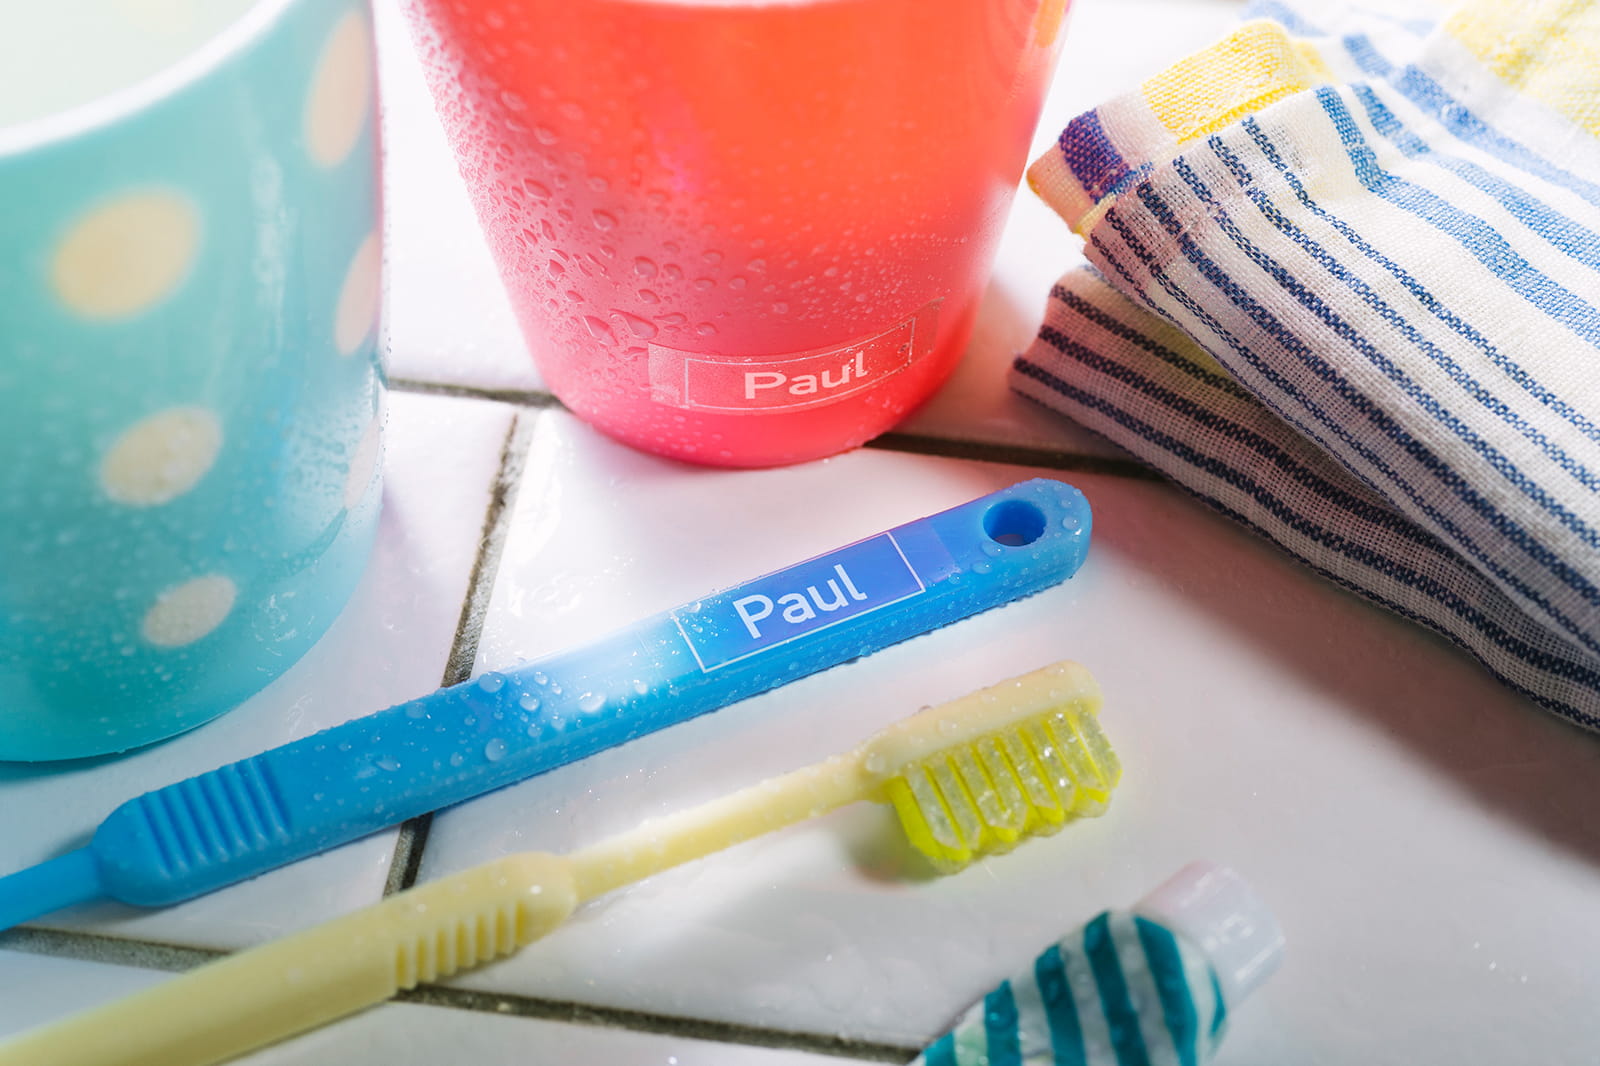 toothbrush with label